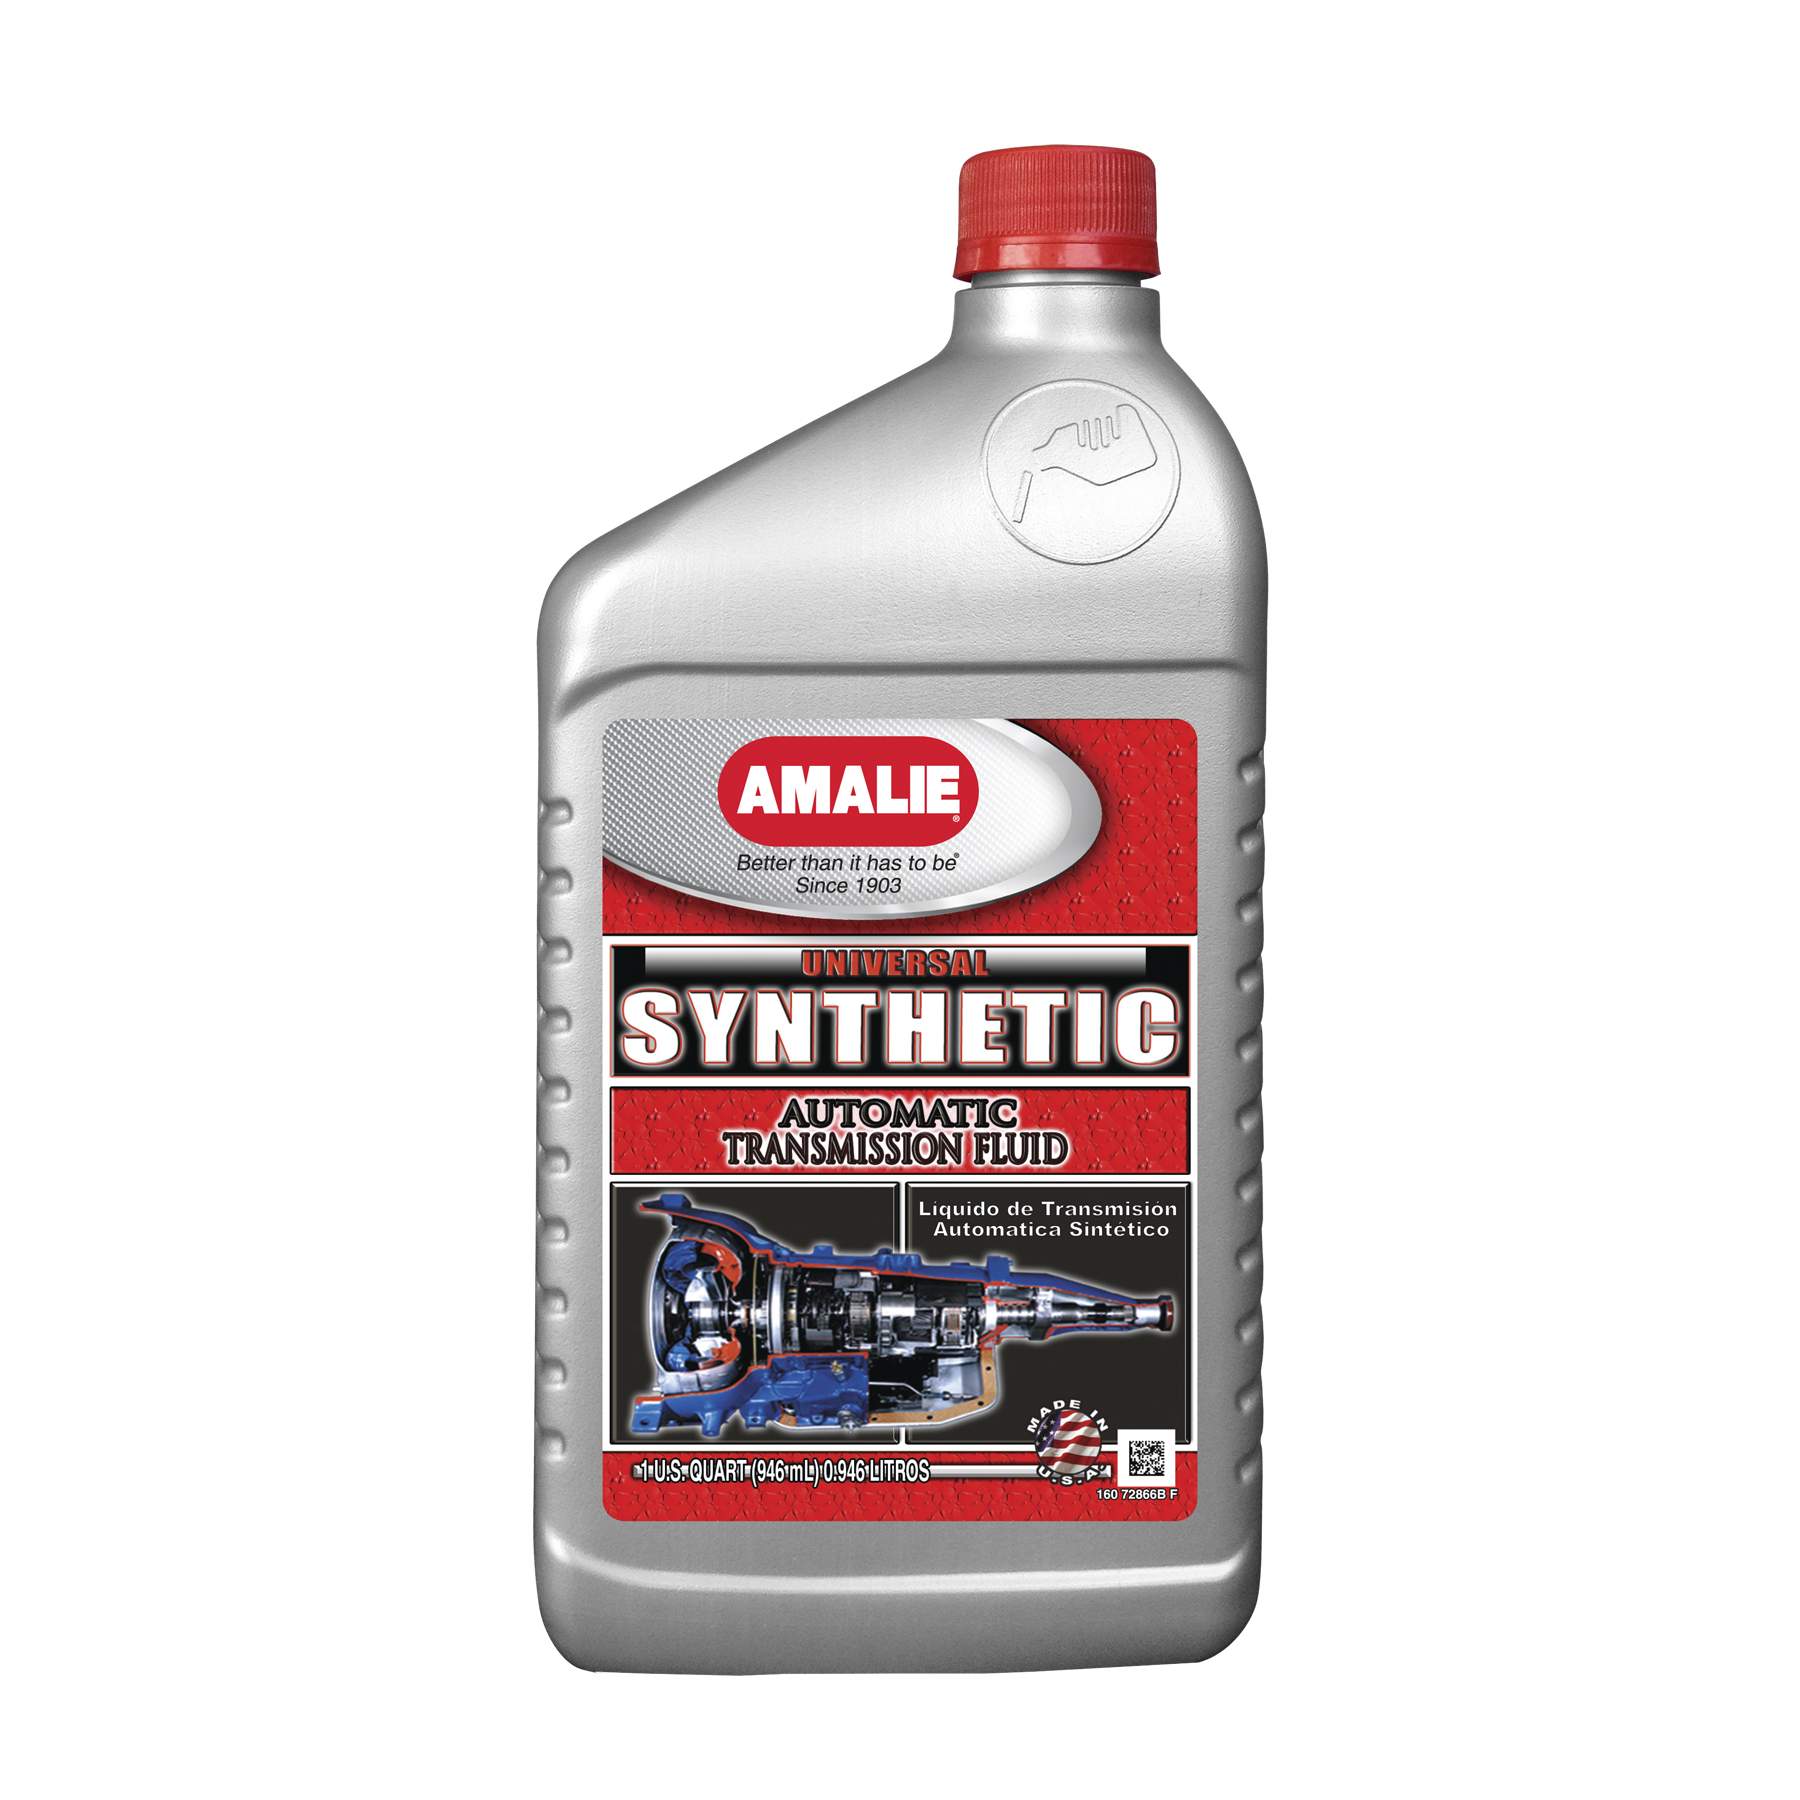 Eurol ATF 6700  Synthetic Transmission Fluid for 8 Speed ZF